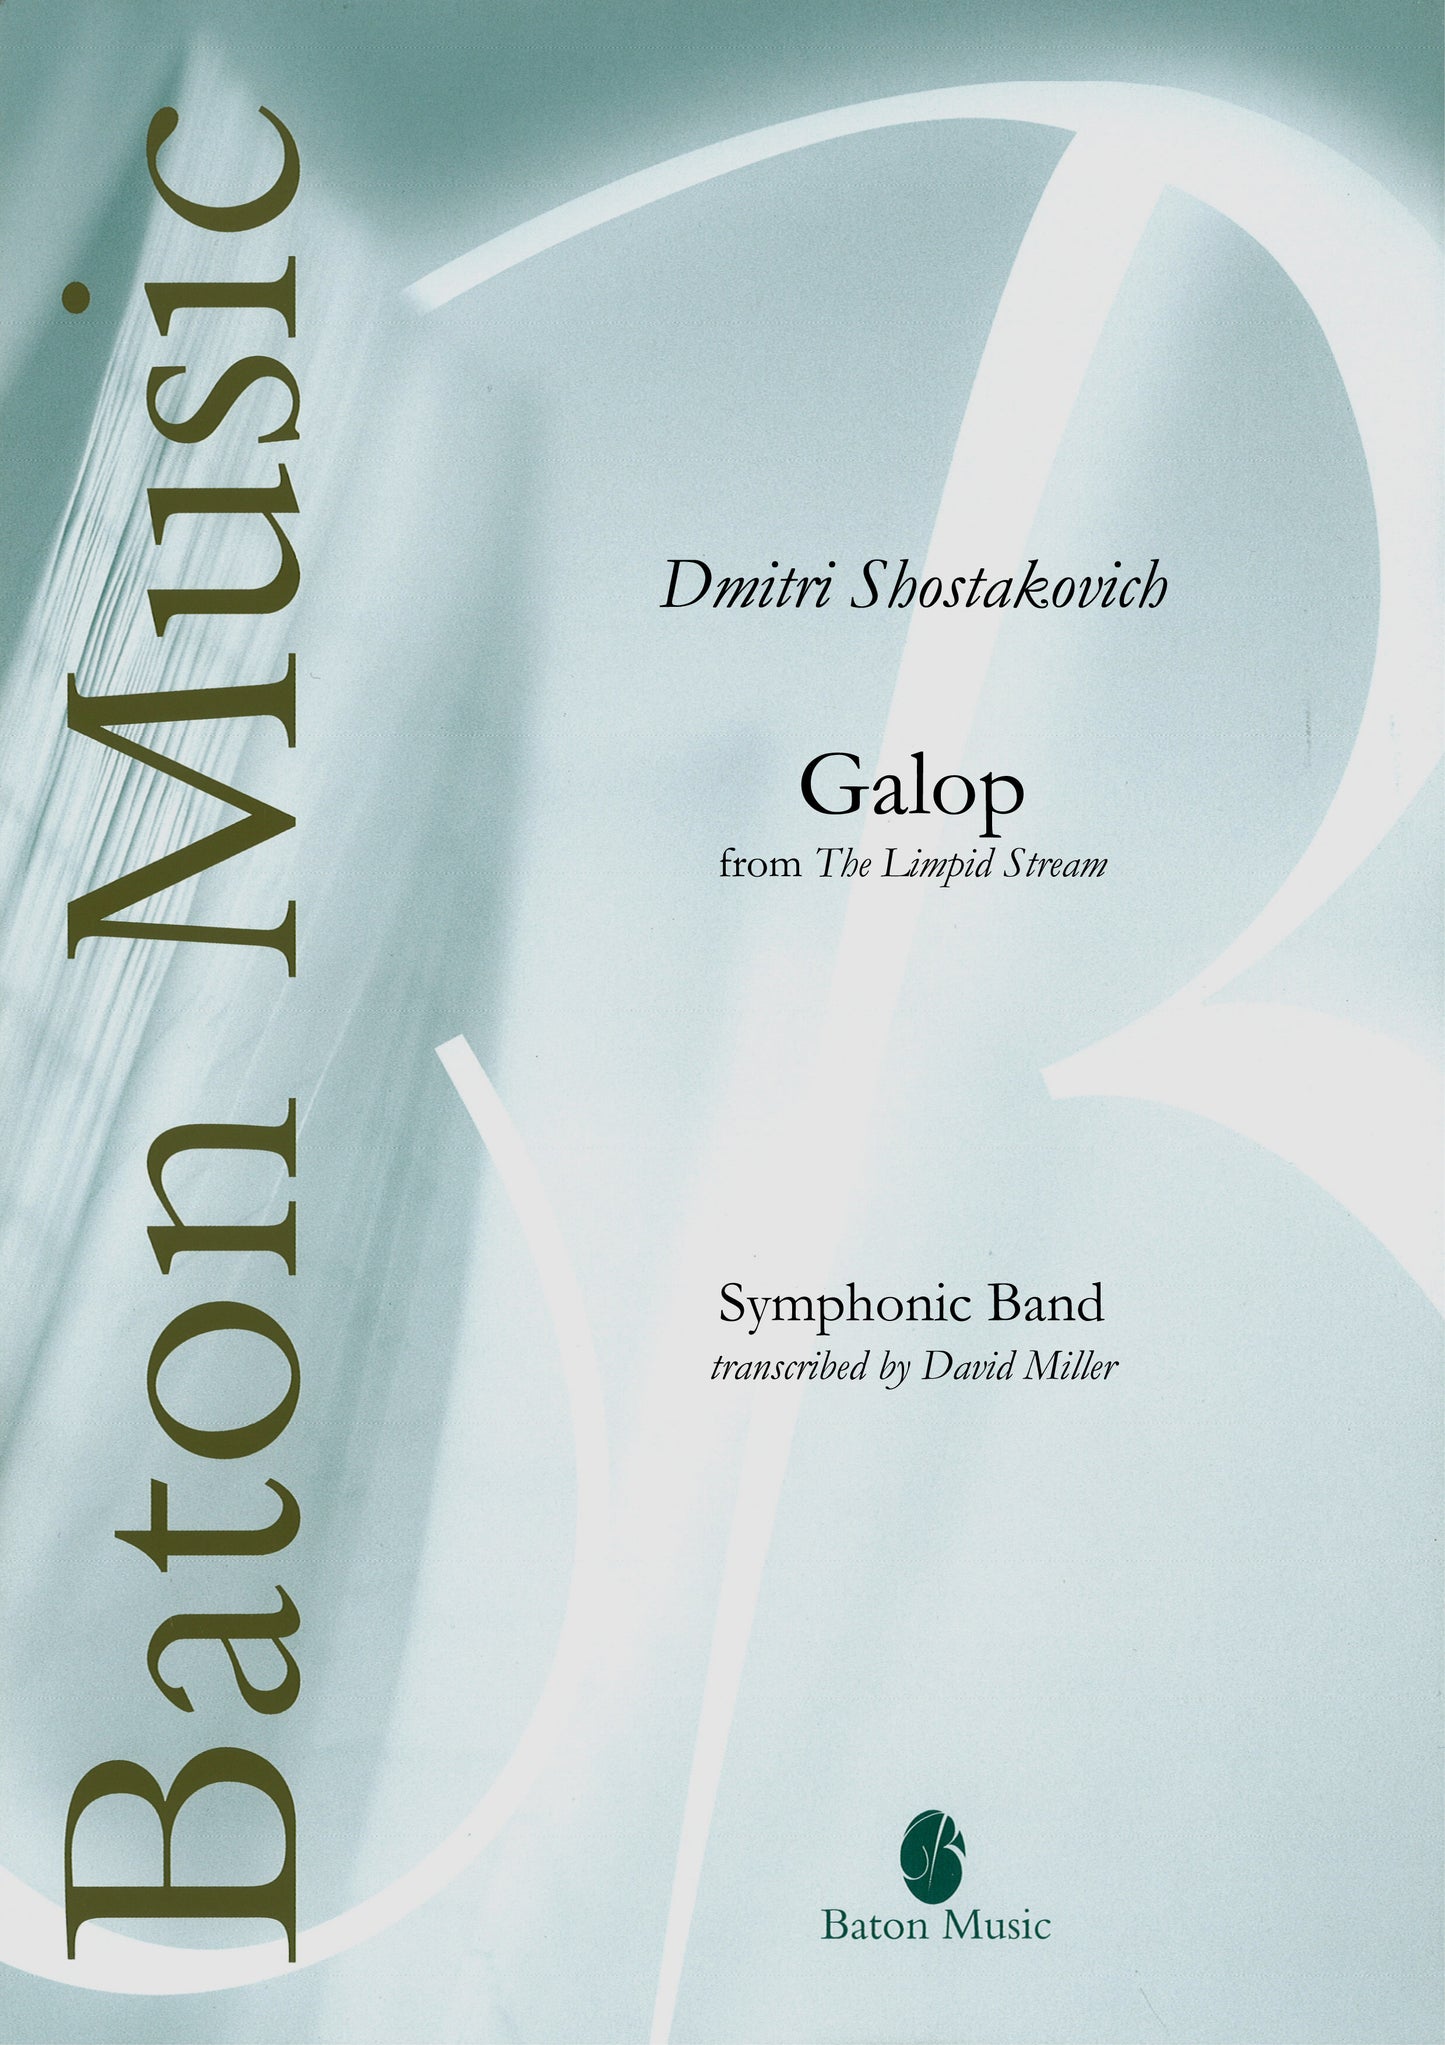 Galop (from The Limpid Stream) - D. Shostakvich